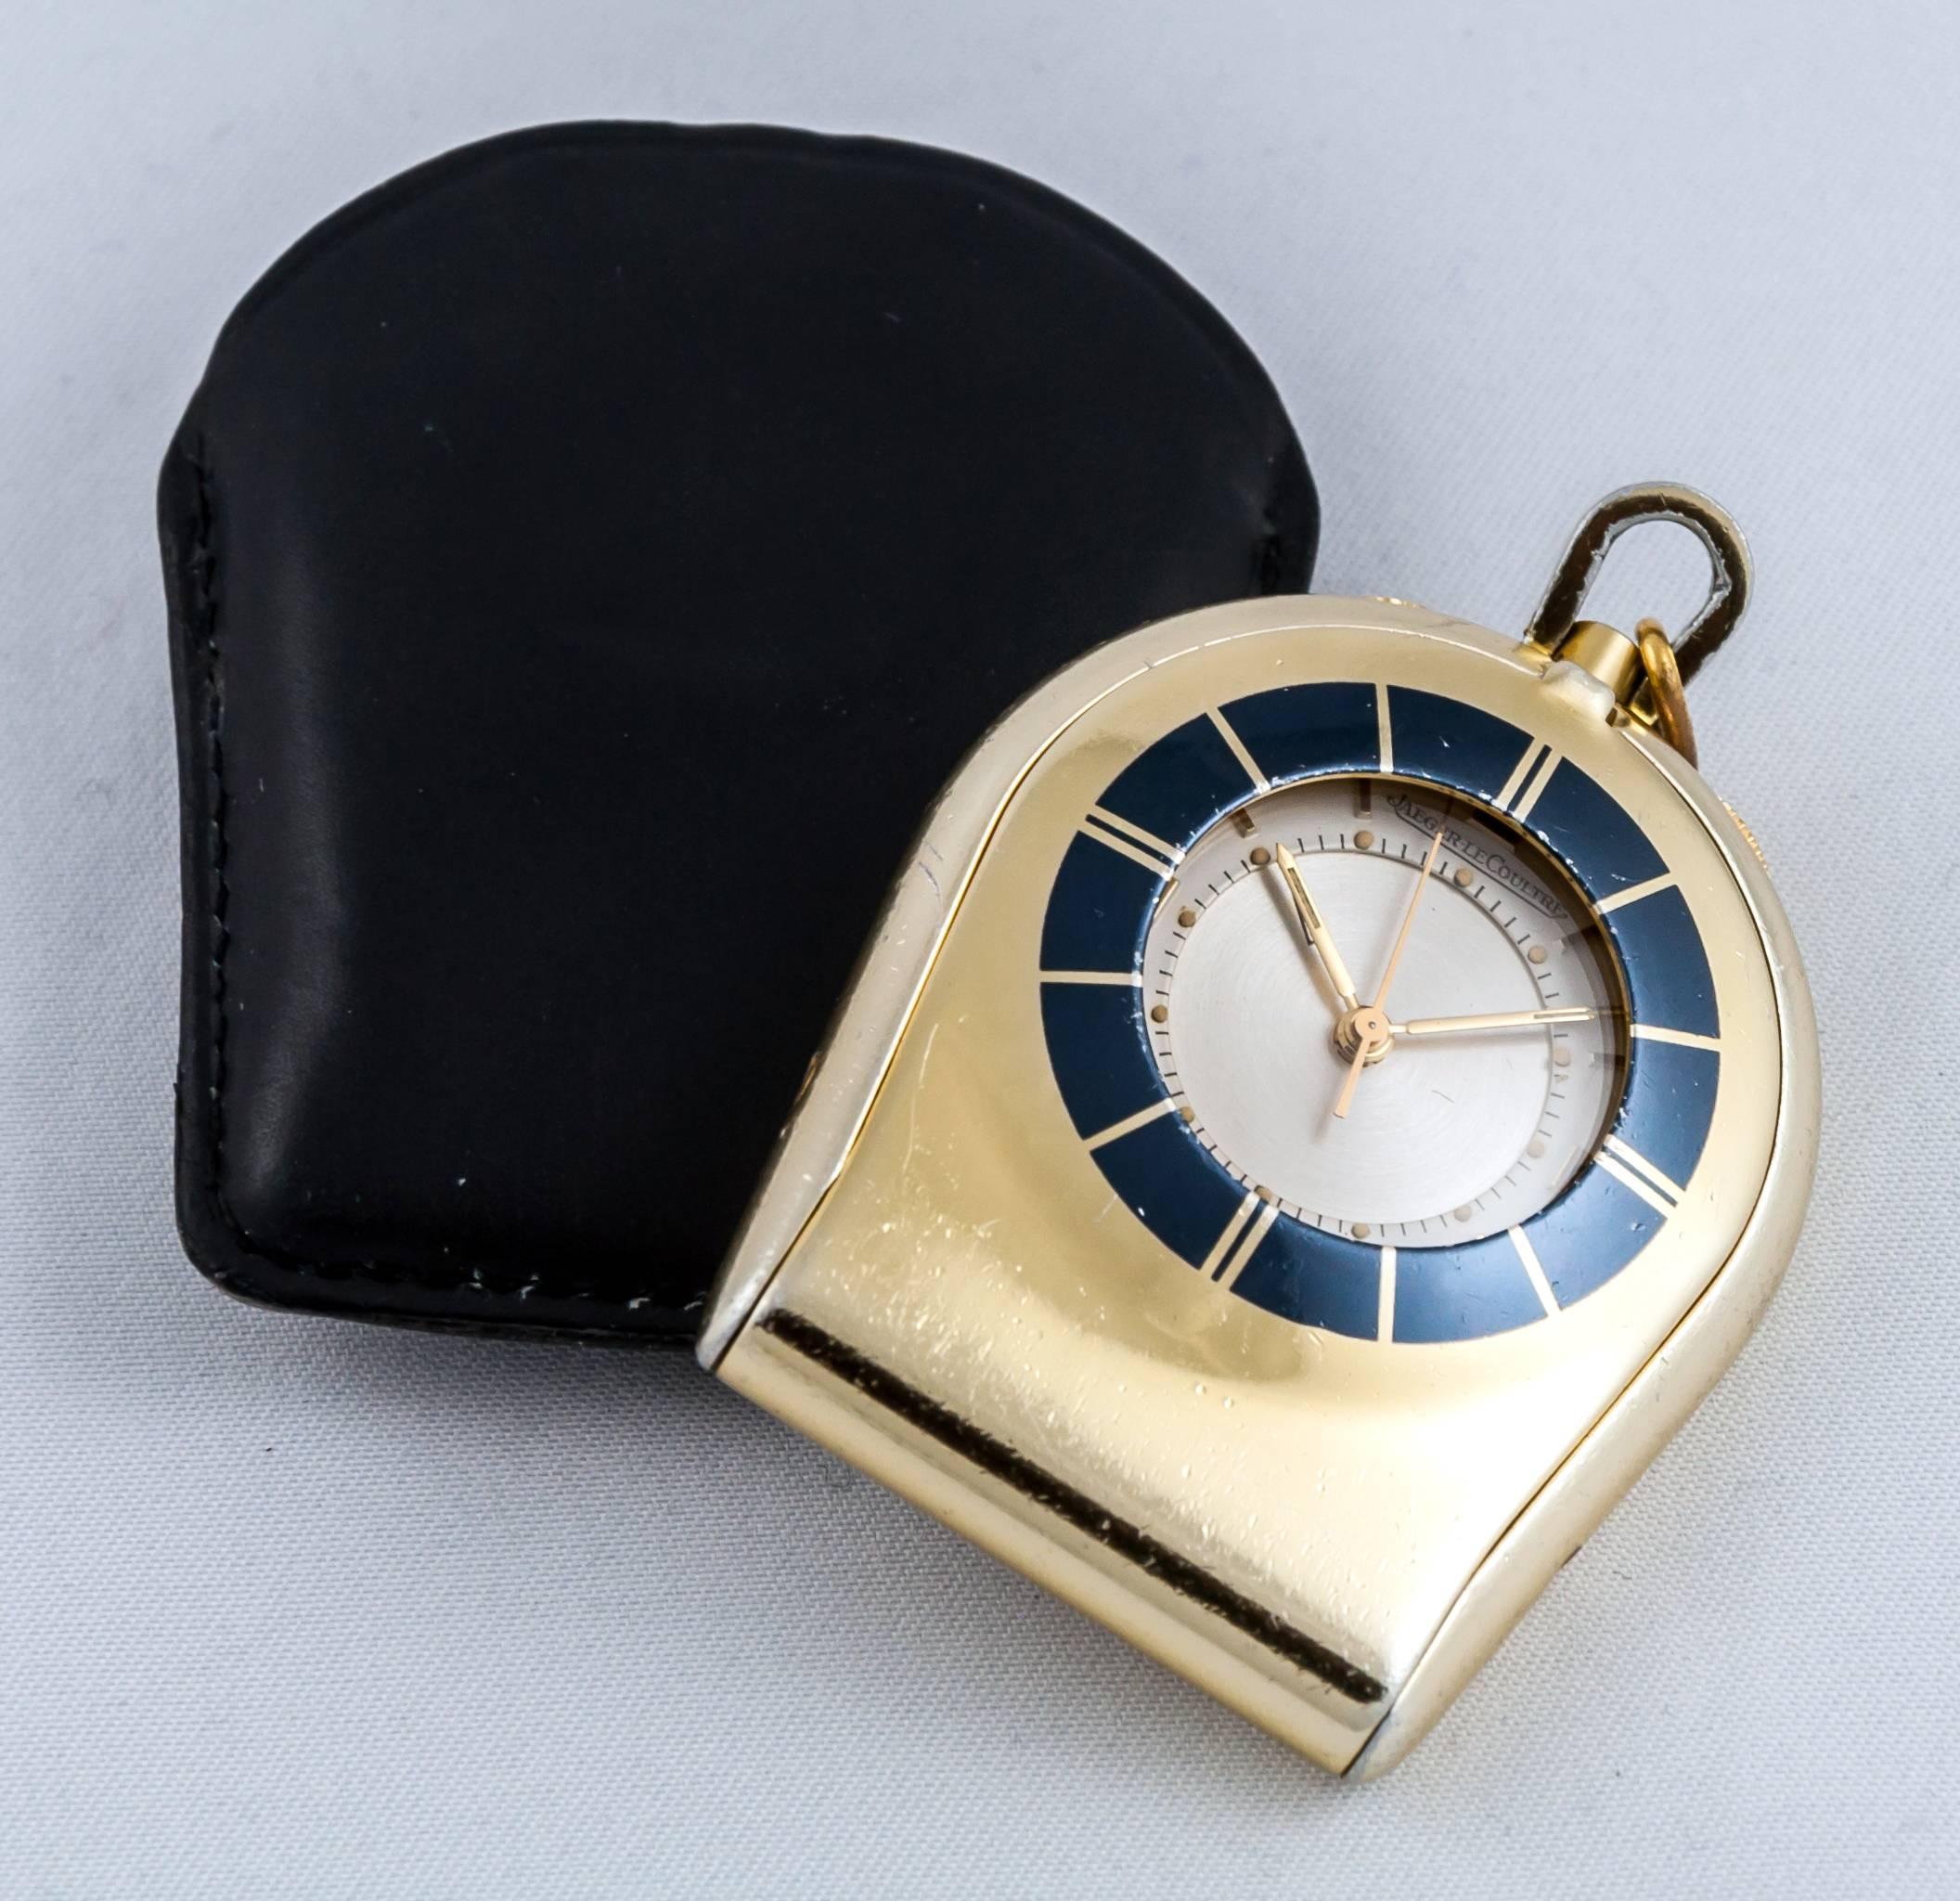 JAEGER LECOULTRE
Pocket watch "Memovox" travel.
Mother-of-pearl dial.
Gold needles and indexes.
Mechanical movement.
Alarm.
Leather pouch.
Warranty 1 year.